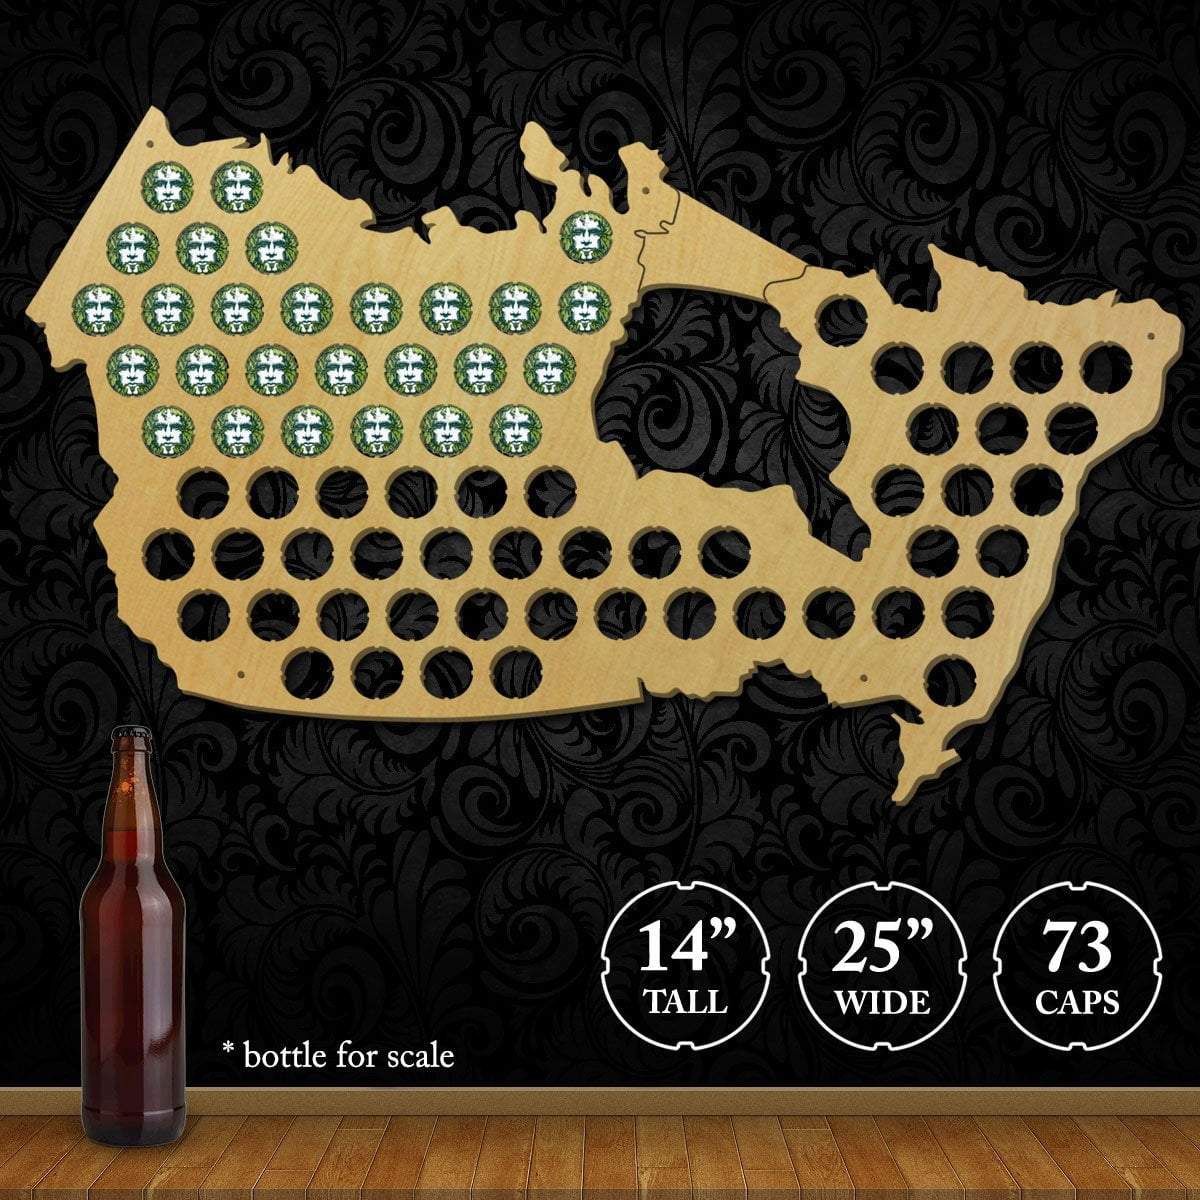 Torched Products Beer Bottle Cap Holder Canada Beer Cap Map (777842884725)